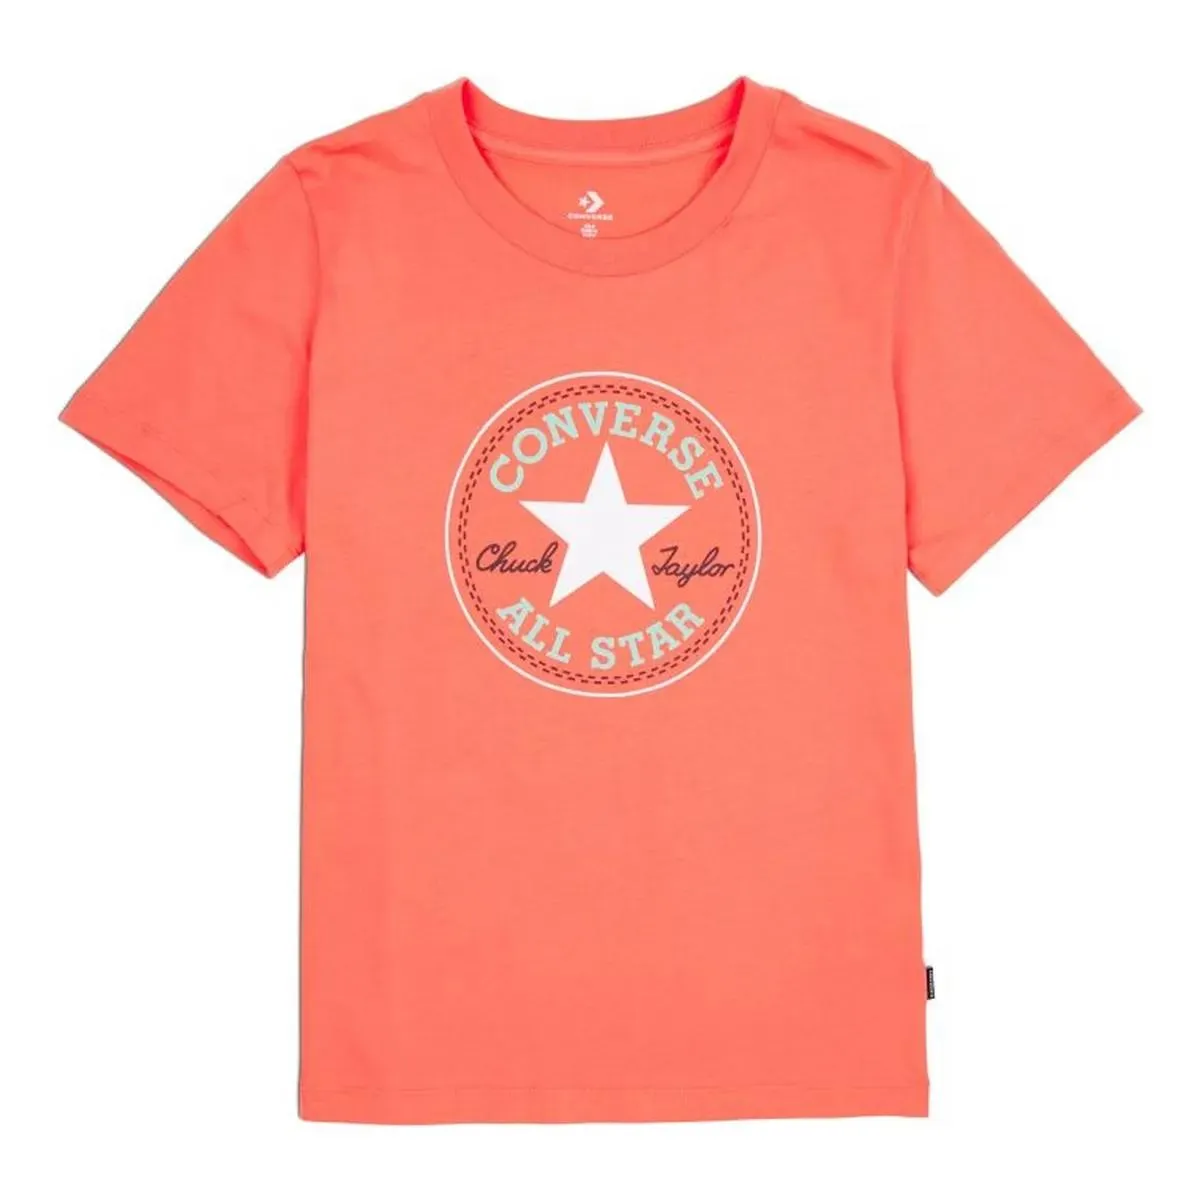 Converse Chuck Taylor All Star Patch Tee 